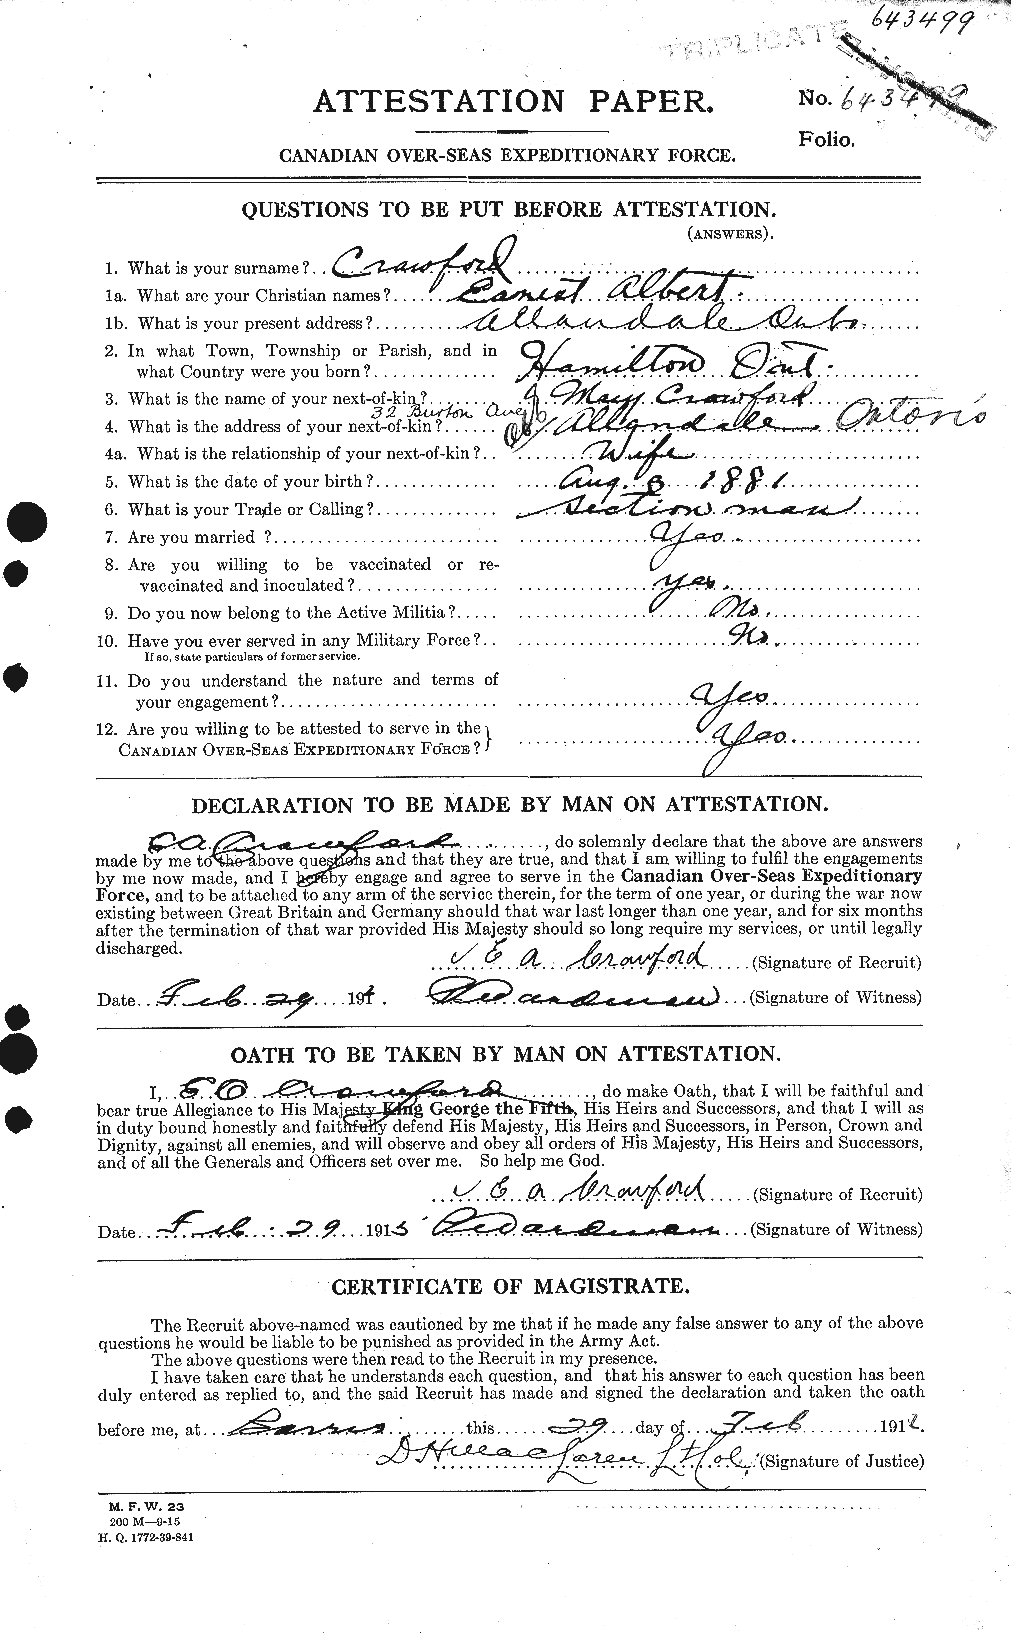 Personnel Records of the First World War - CEF 060808a